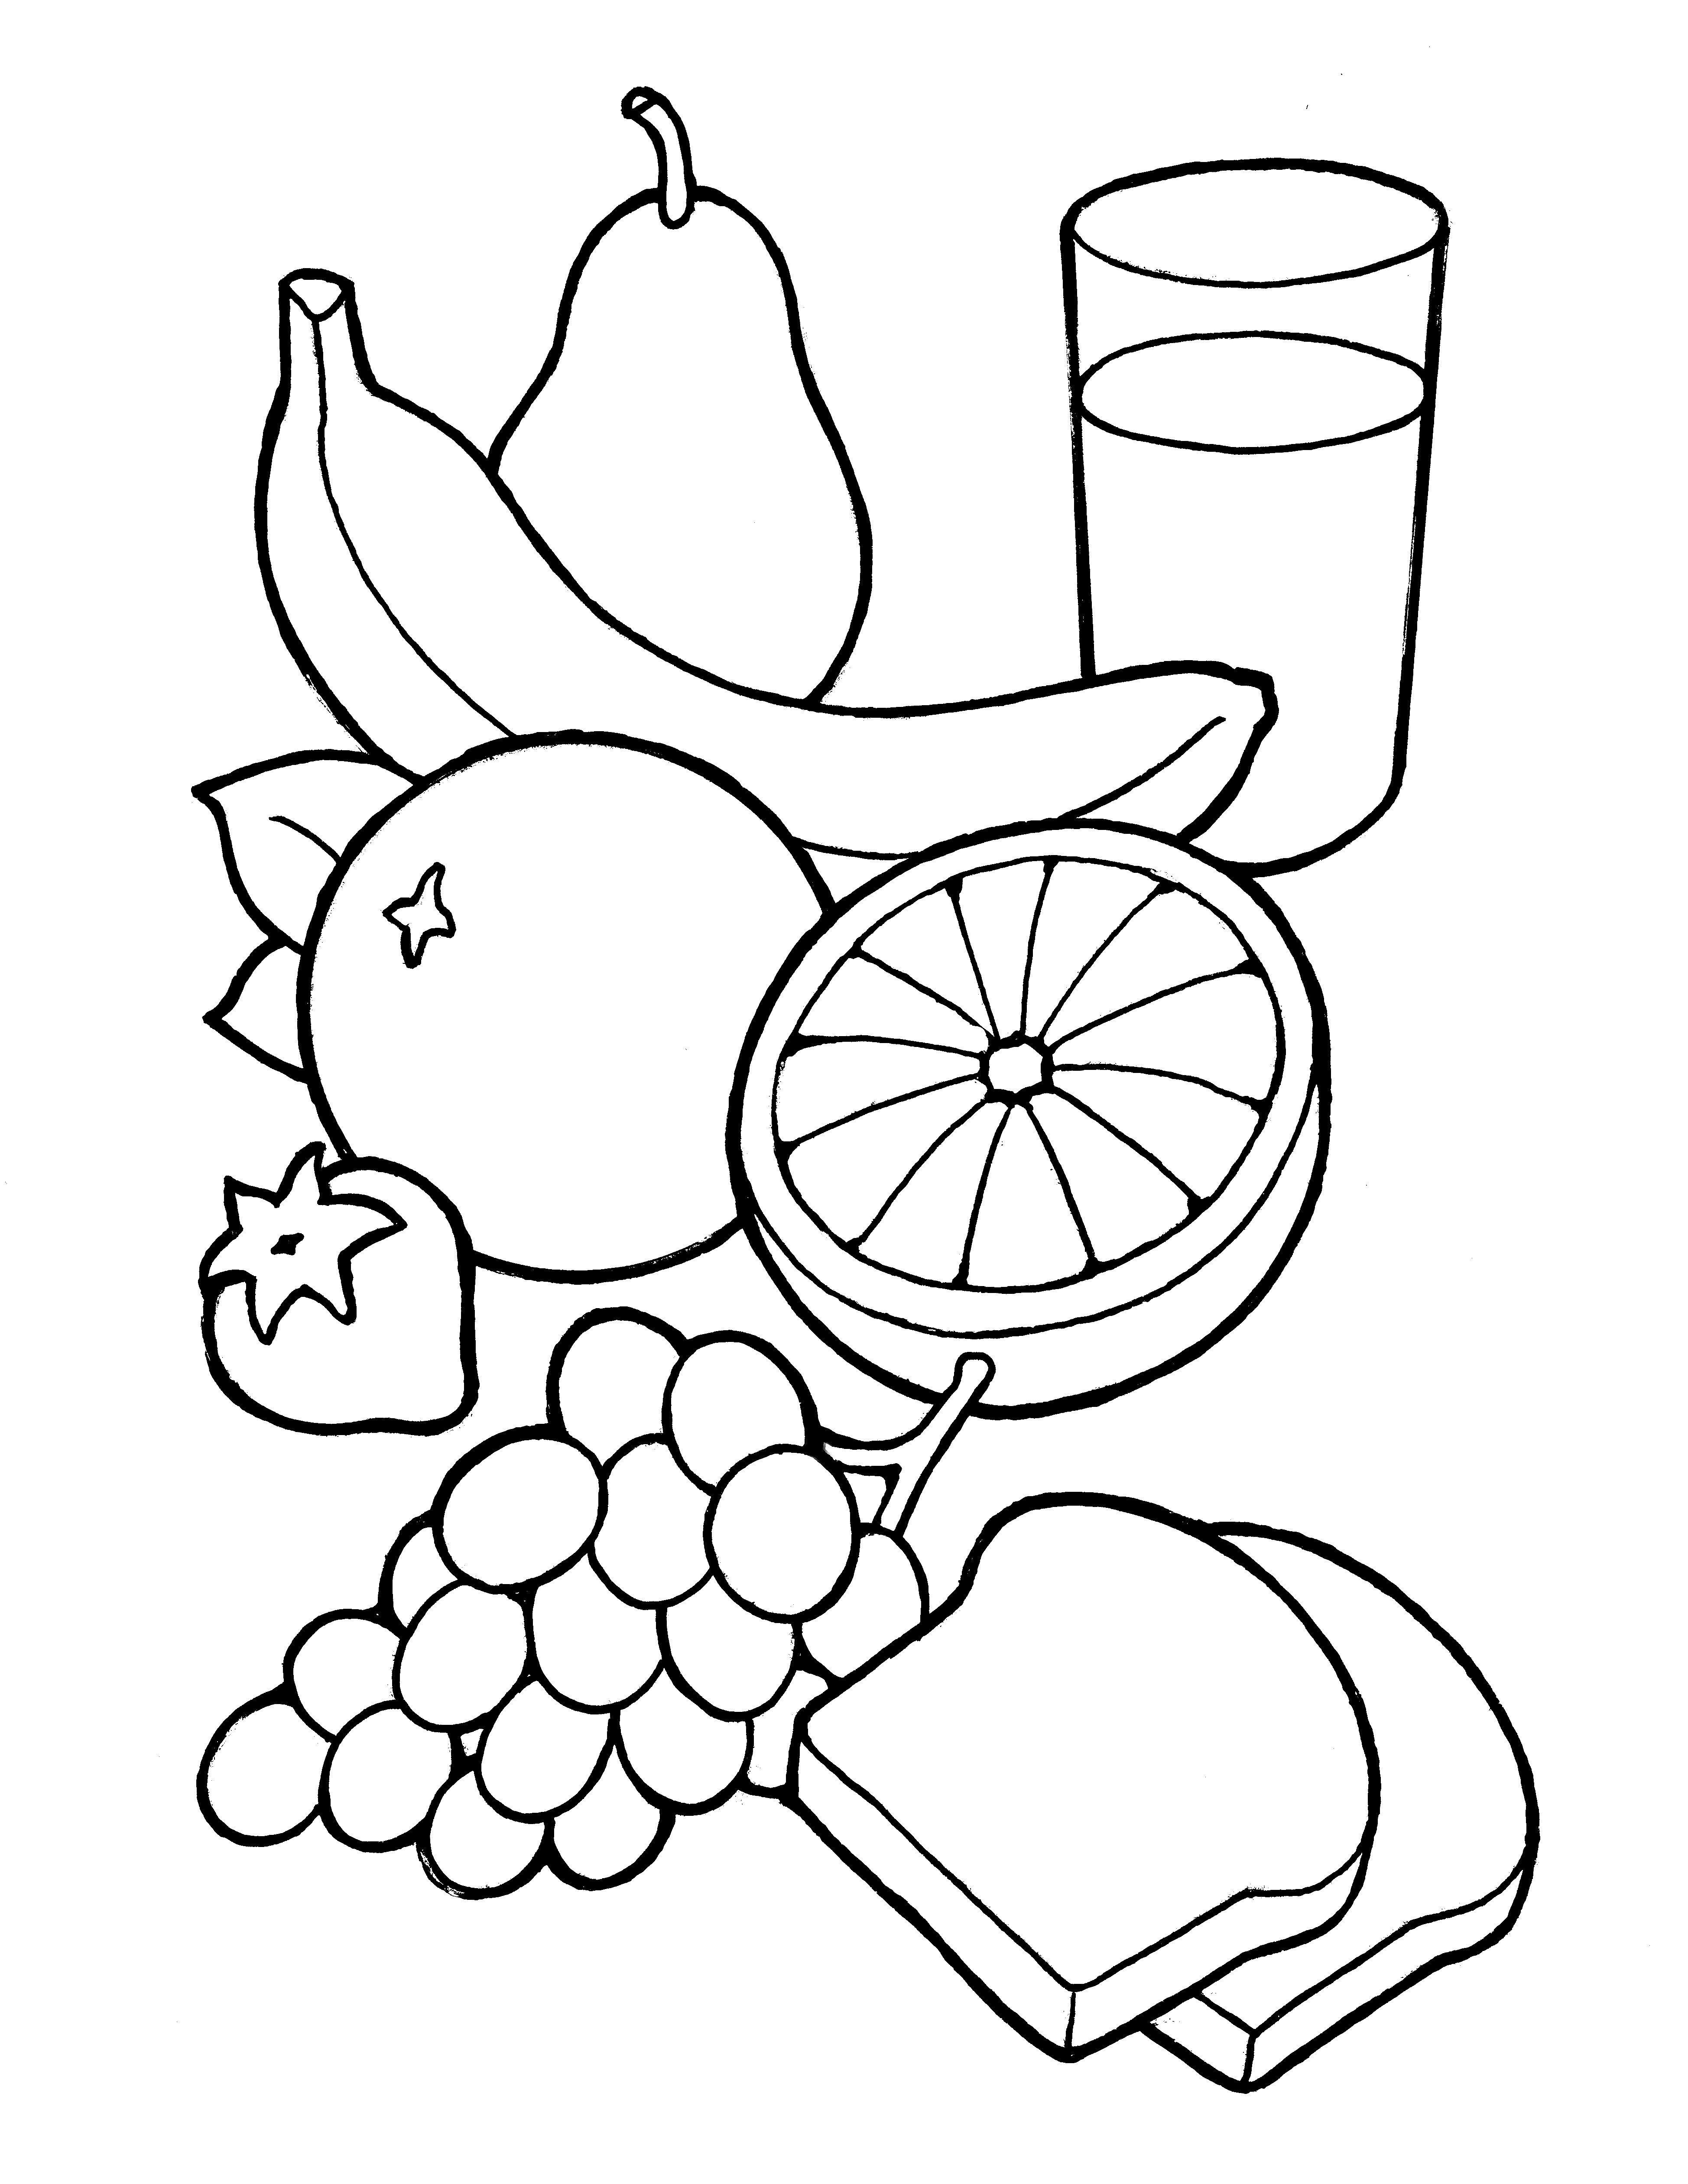 Fruits Healthy Food Vector PNG Images Fruits In A Plate One Continuous  Line Art Drawing Vector Illustration Food Theme Healthy And Fresh Fruit  Single Hand Drawn With Color Isolated On White Background